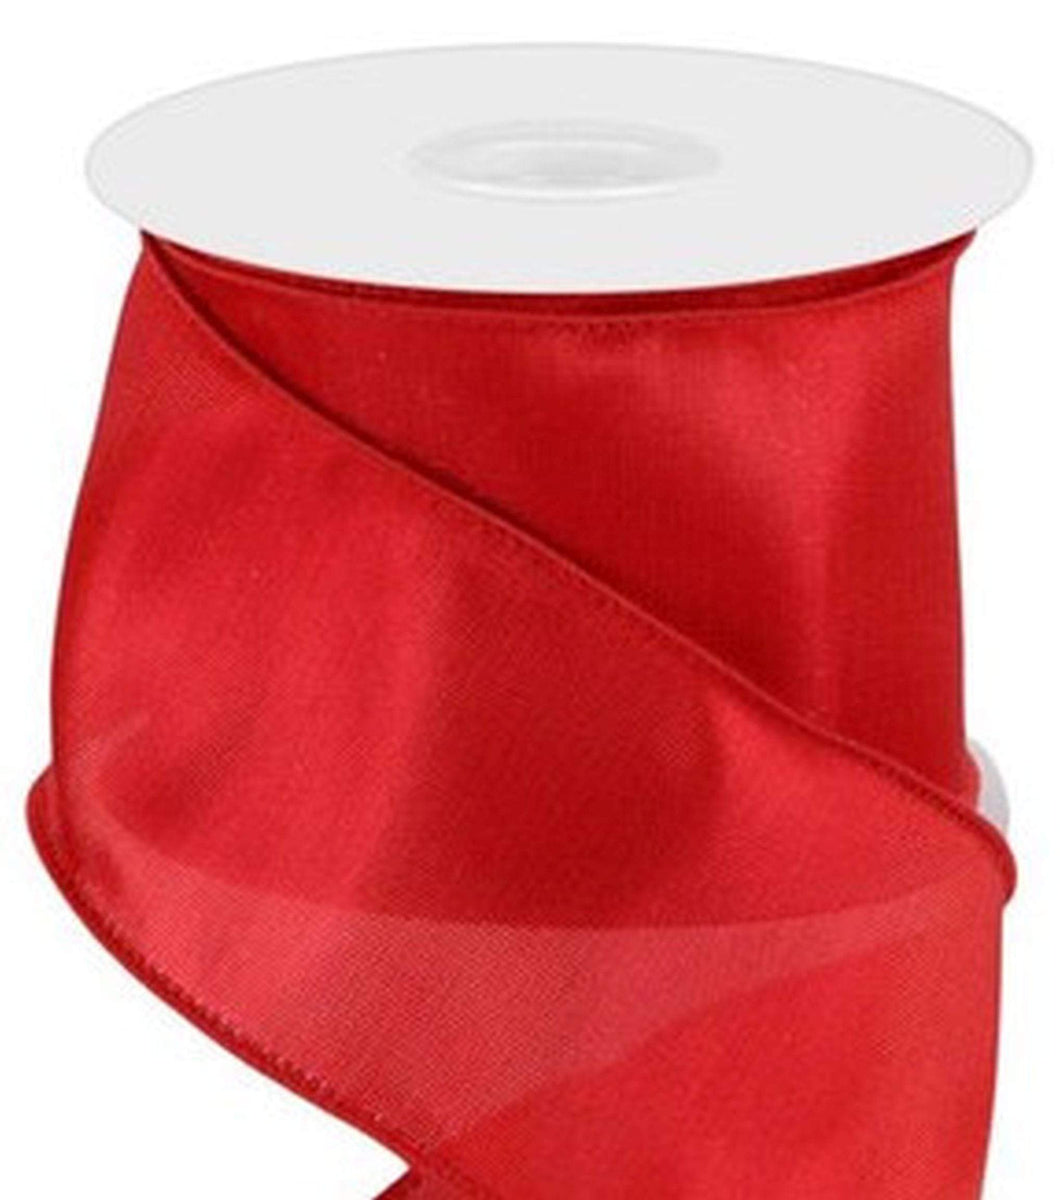 Red Currant 1 1/2 Inch x 25 Yards Satin Ribbon - Buy Now at